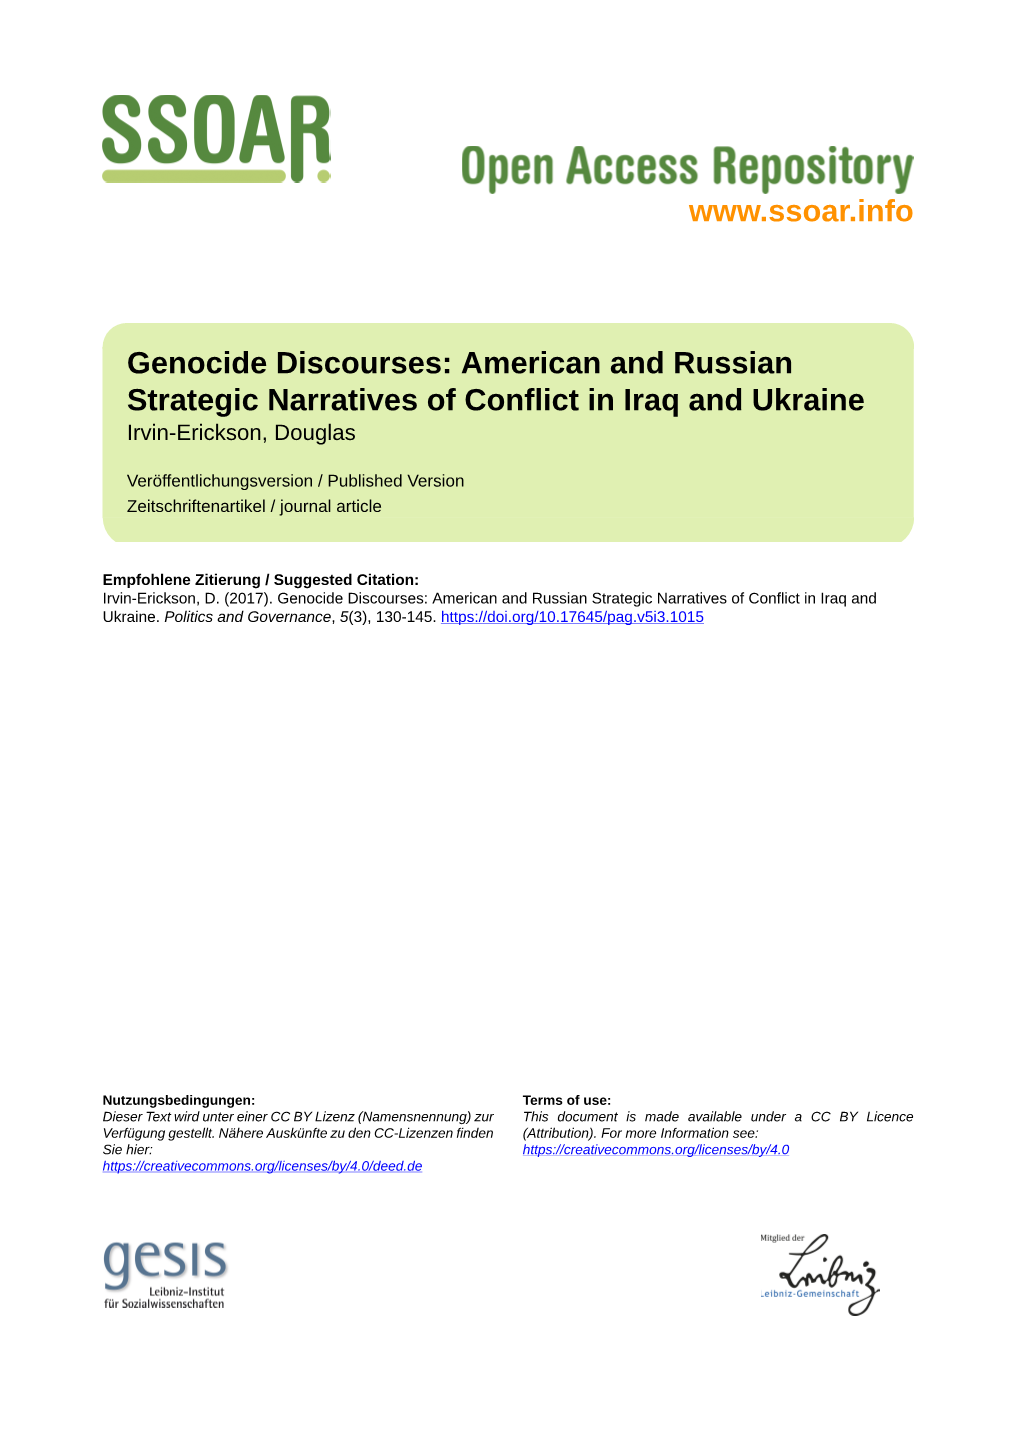 Genocide Discourses: American and Russian Strategic Narratives of Conflict in Iraq and Ukraine Irvin-Erickson, Douglas